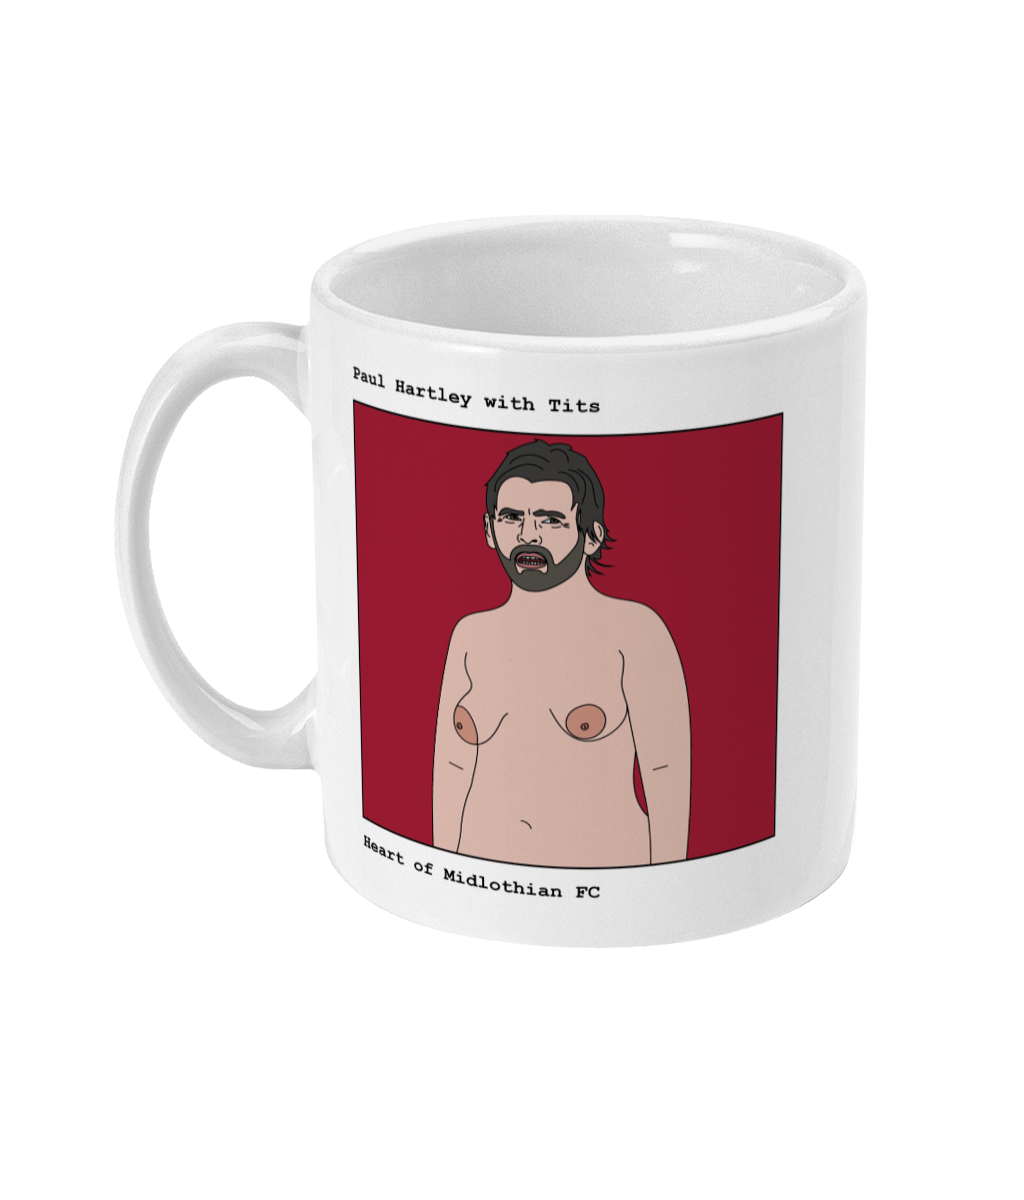 Paul Hartley with Tits - Hearts - Footballers with Tits